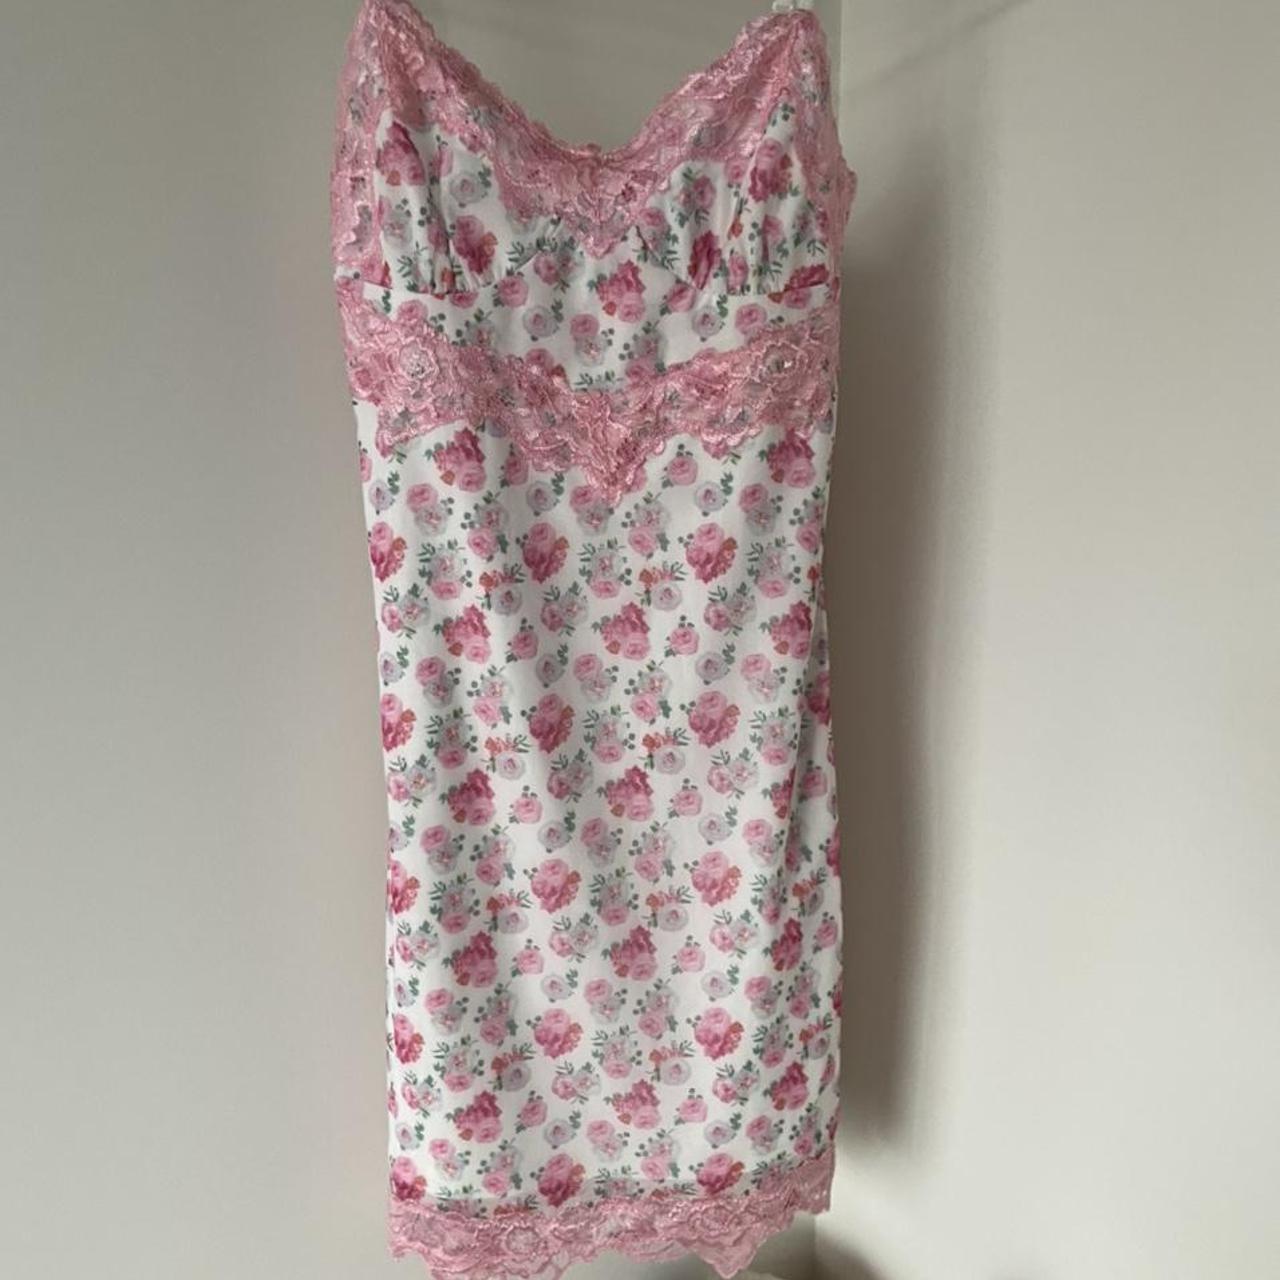 tigermist pink and white floral lace dress never... - Depop